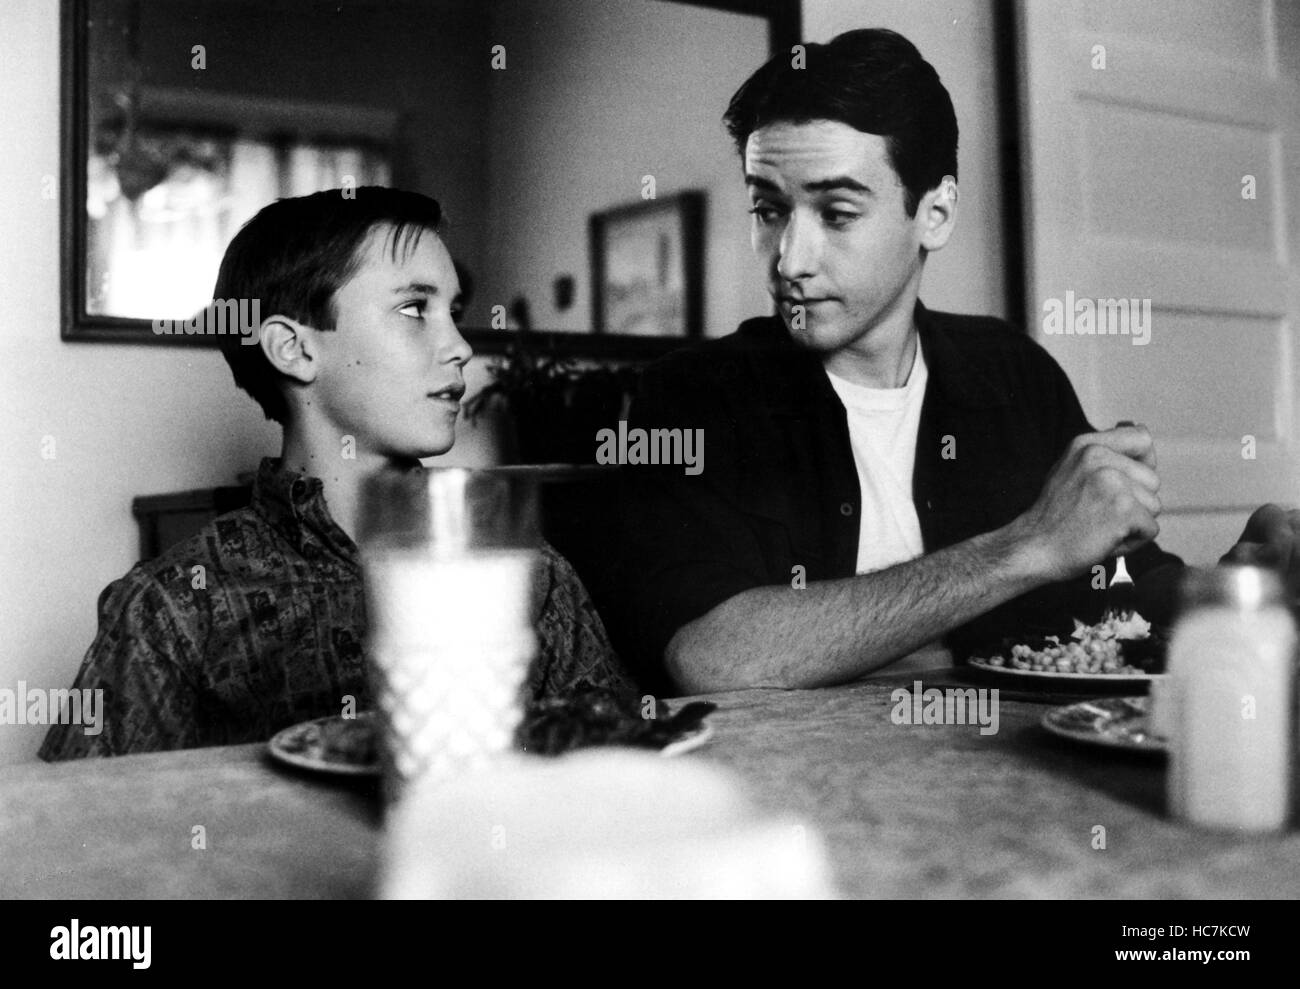 STAND BY ME, Wil Wheaton, John Cusack, 1986 Stock Photo - Alamy